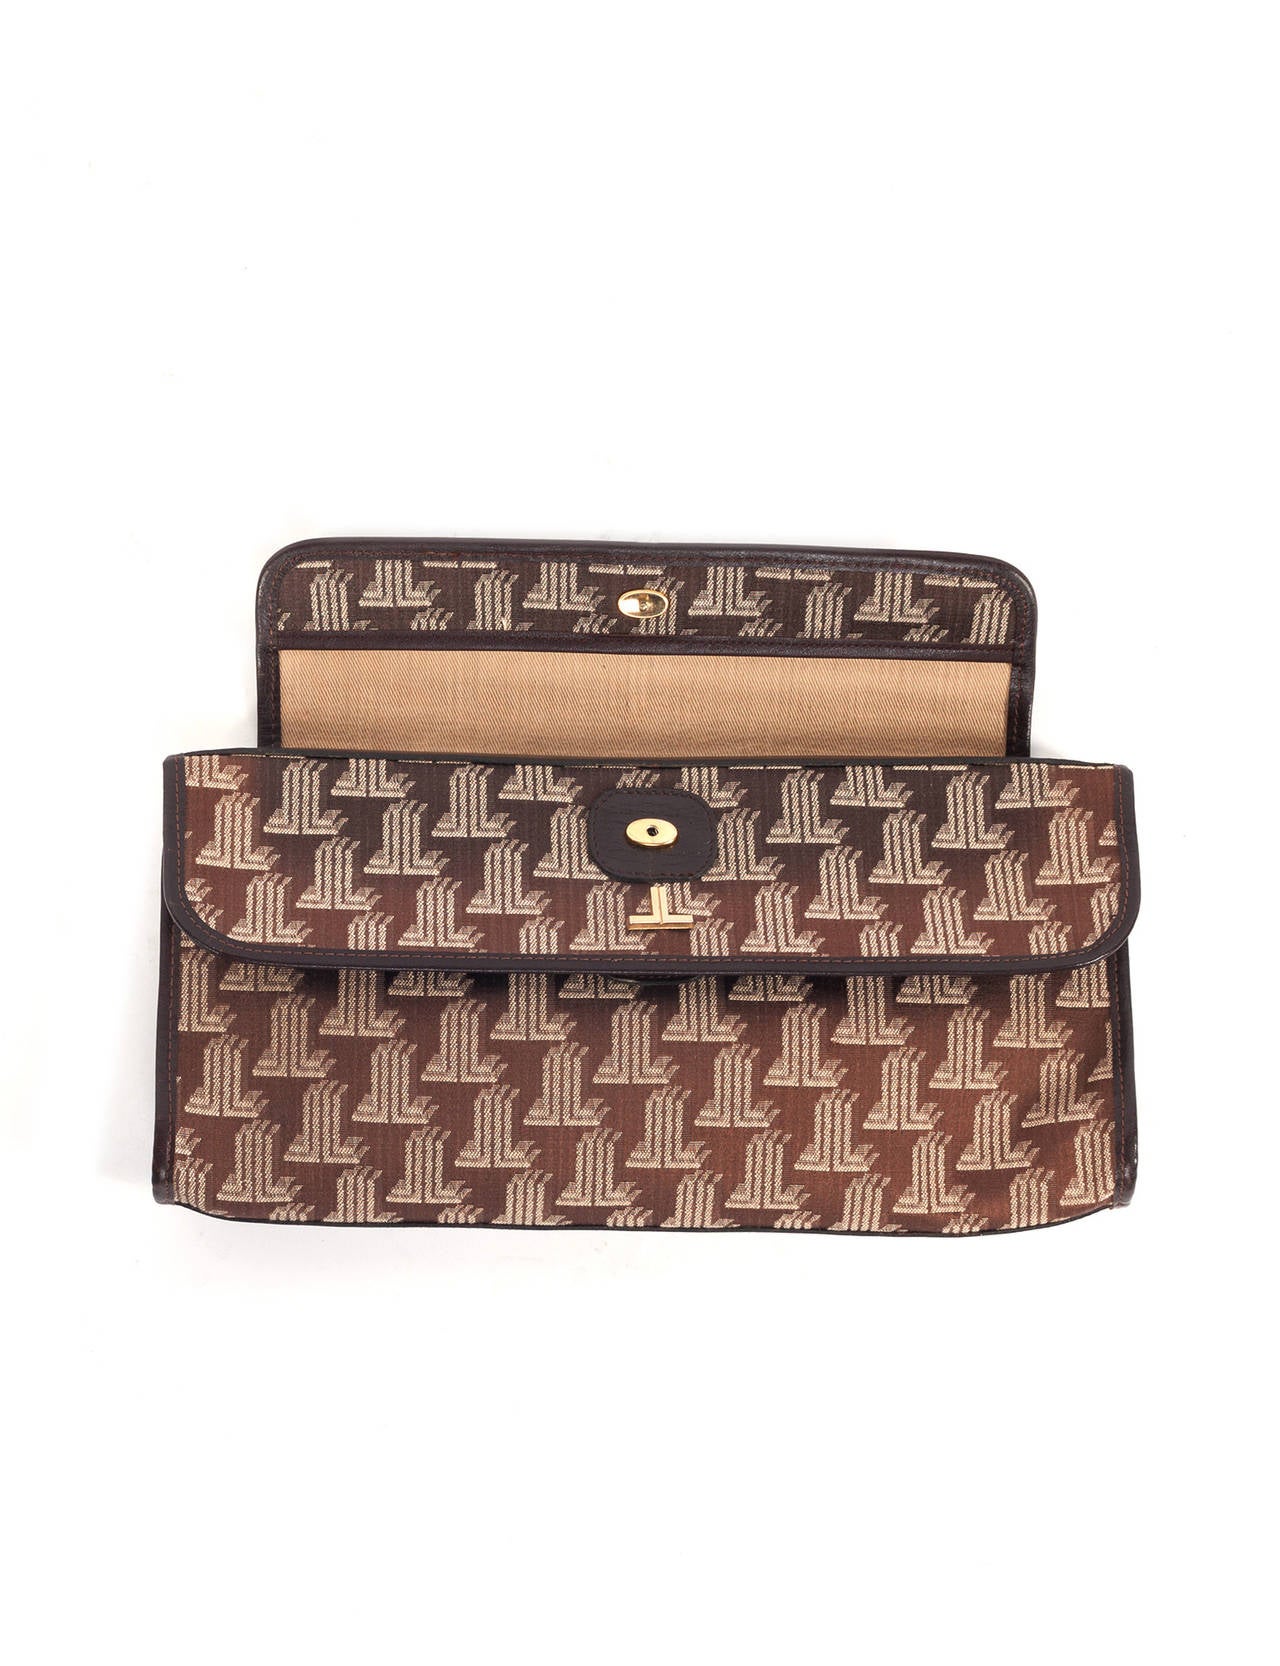 Lanvin Vintage 70's logo clutch with strap. Clutch has double flap pocket details, adjustable leather strap in dark brown, snap closure, inside zipper pockets, iconic lanvin double L logo print, leather trim, brass clips.